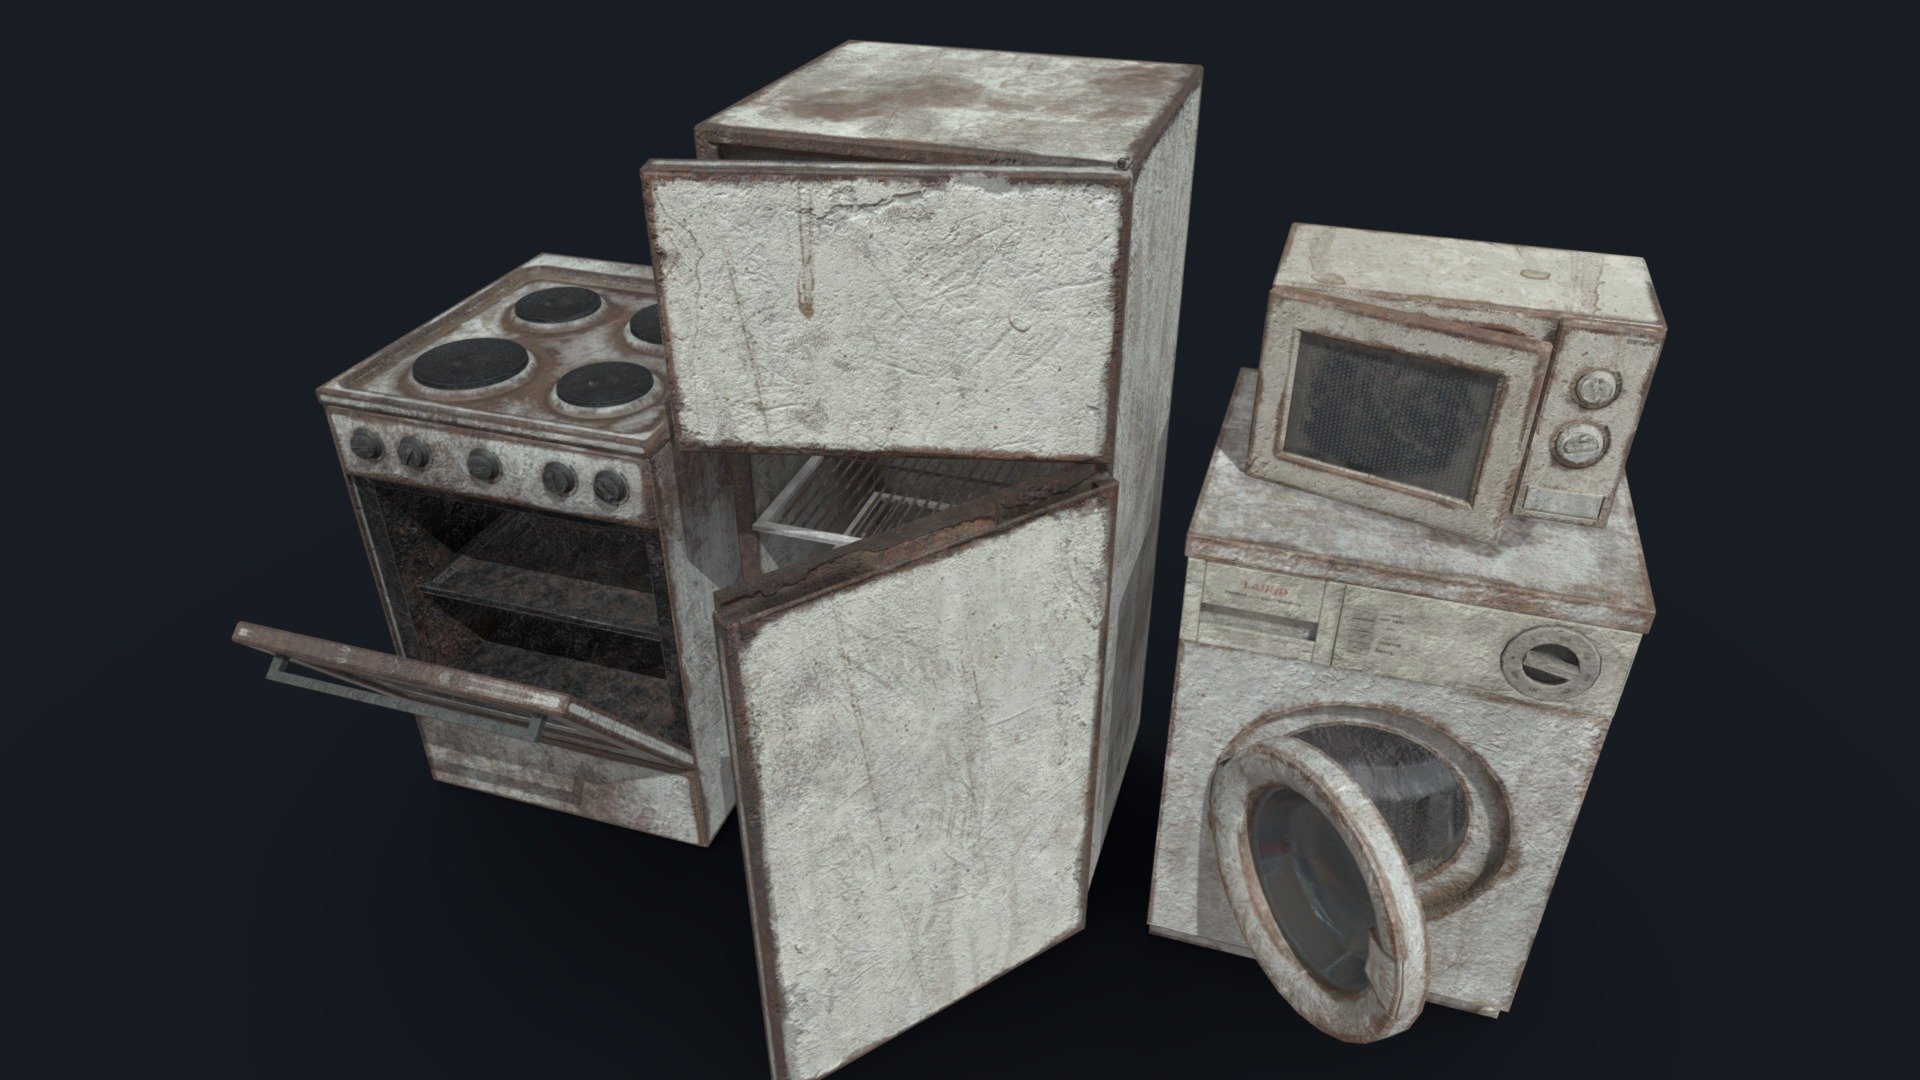 Old abandoned kitchen appliances. The low-polygon set is suitable for filling game scenes in the style of horror, post-apocalypse, and cyberpunk. Can also be used as trash in an urban setting.
Purchase:
https://www.artstation.com/a/24225173 - Abandoned Kitchen Appliances - 3D model by Crazy_8 (@korboleevd) 3d model